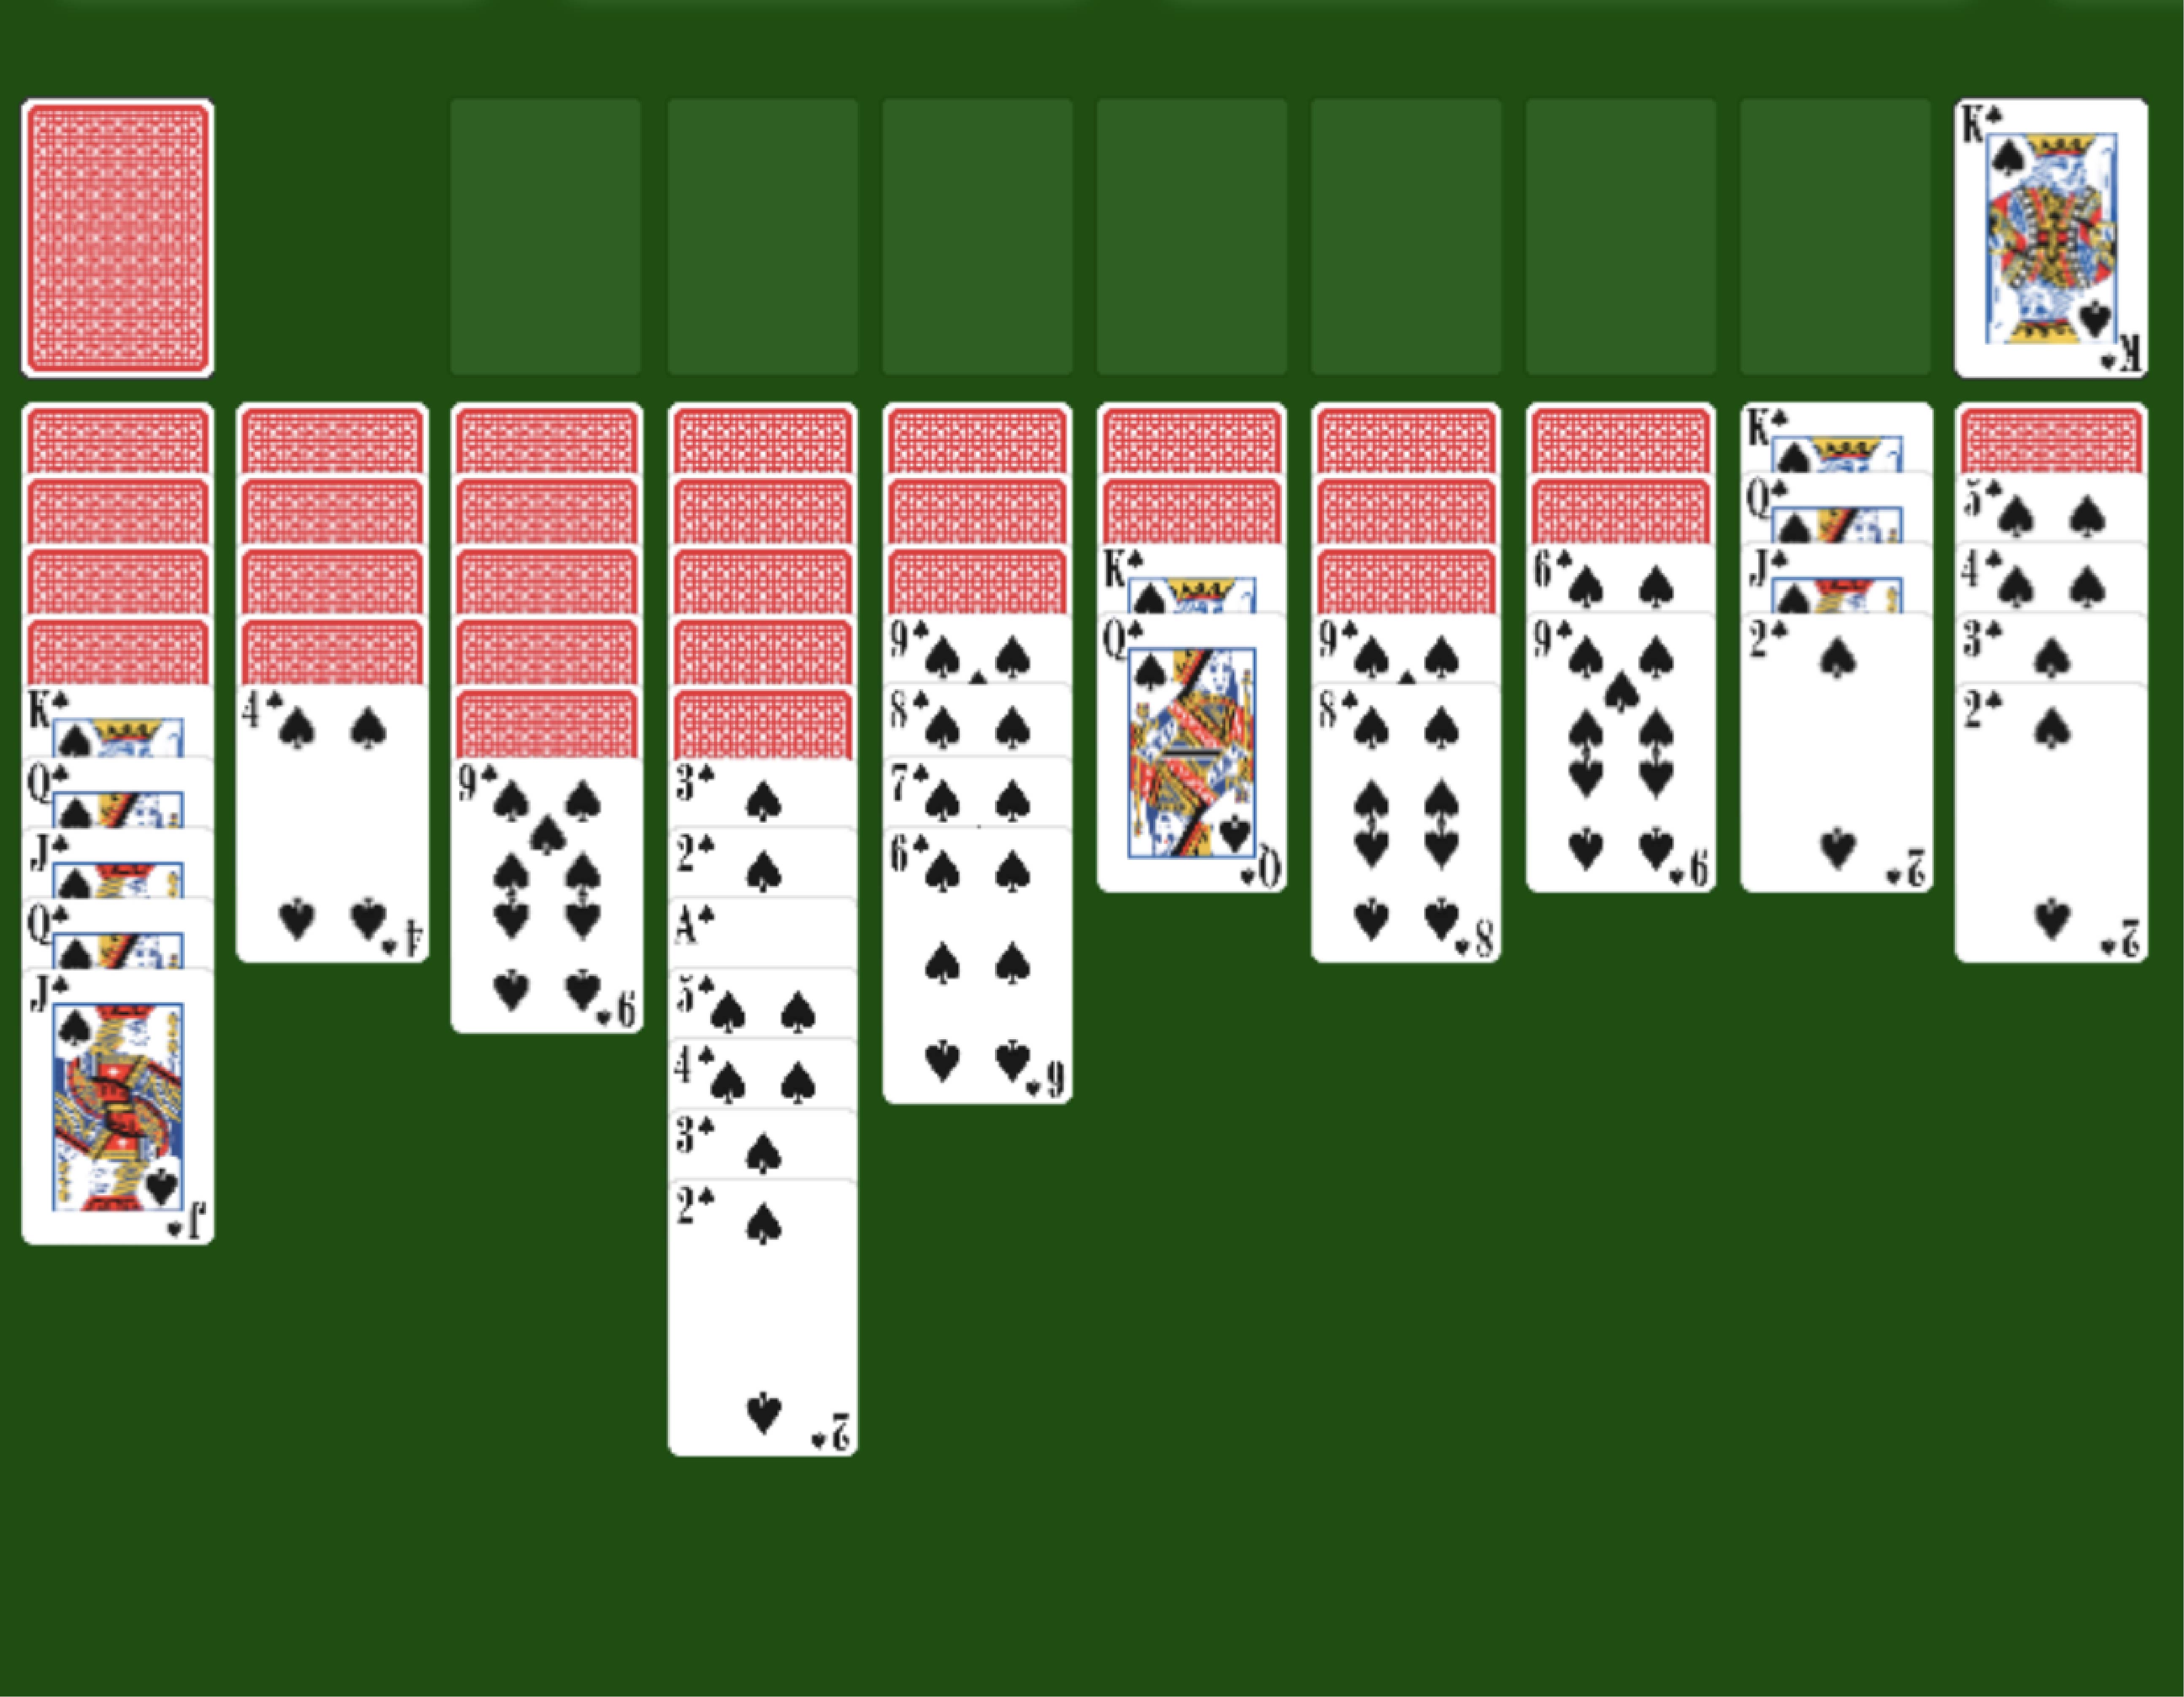 spider 2 suits solitaire free online